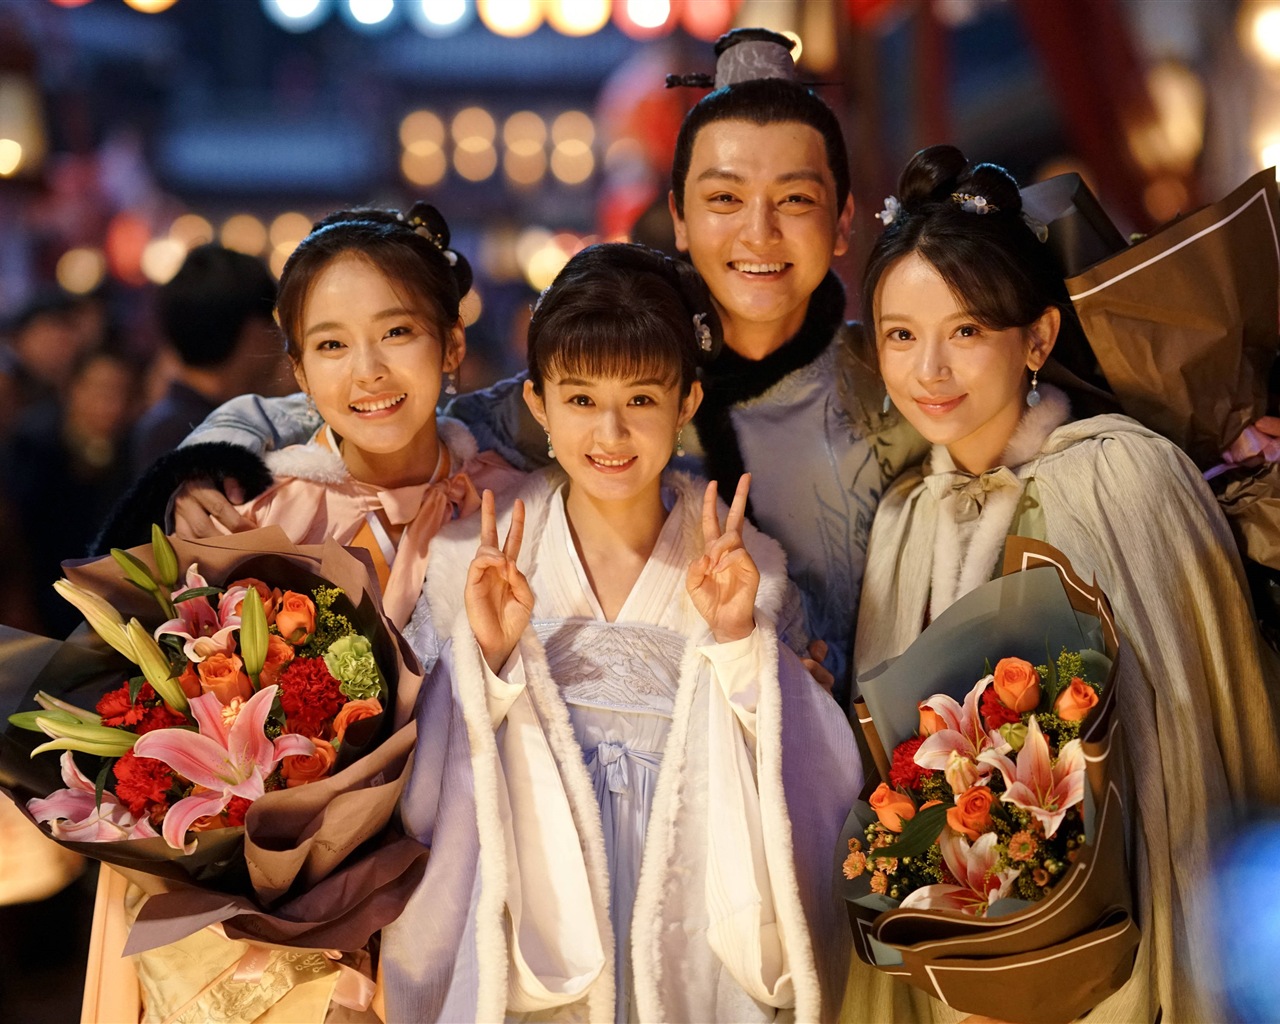 The Story Of MingLan, TV series HD wallpapers #48 - 1280x1024